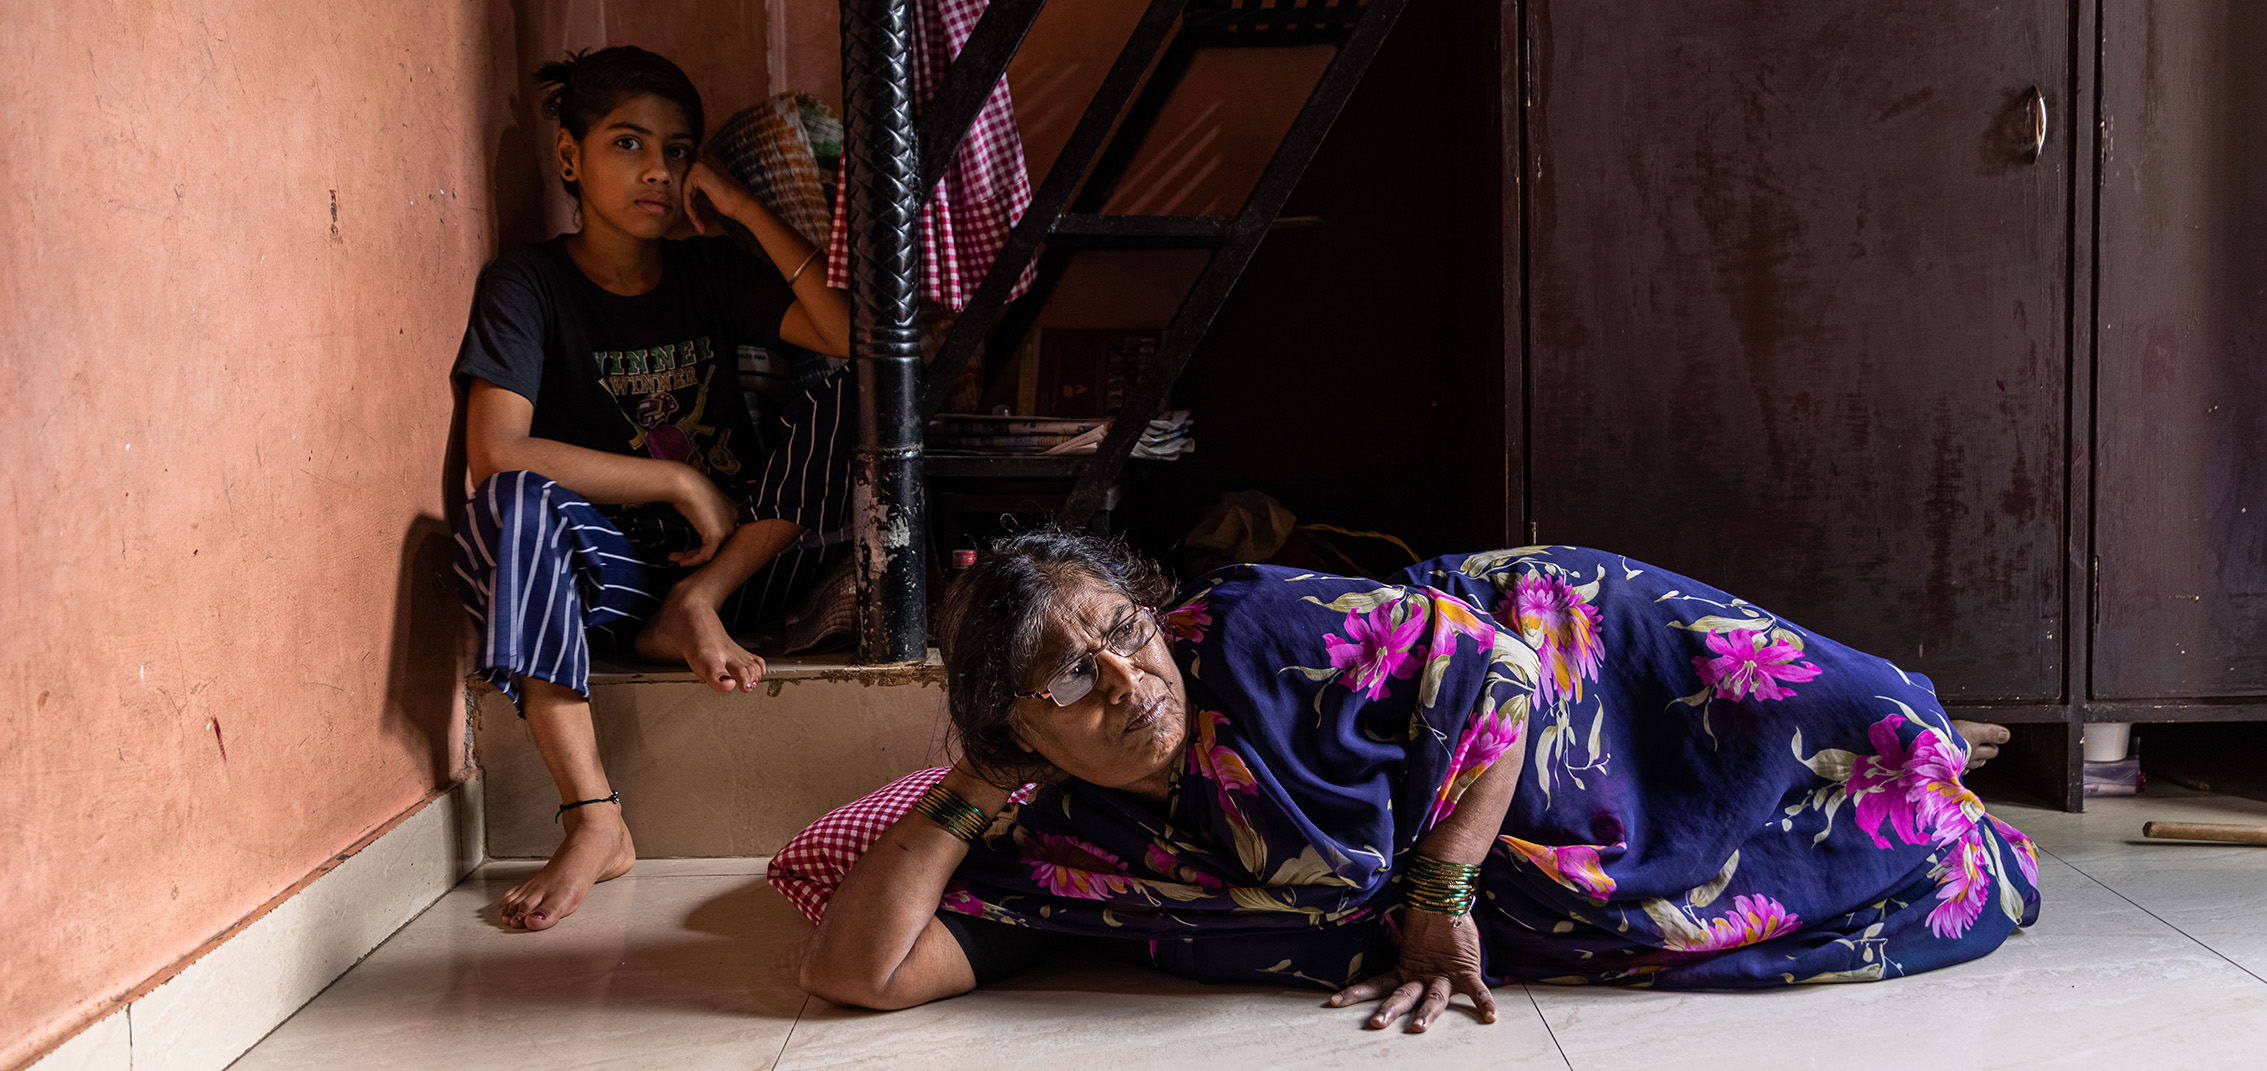 She has been disabled since she was 10 months old and can’t use her legs. That’s never stopped her from cooking for her family and doing things around her home. But getting the COVID-19 vaccine was another story.